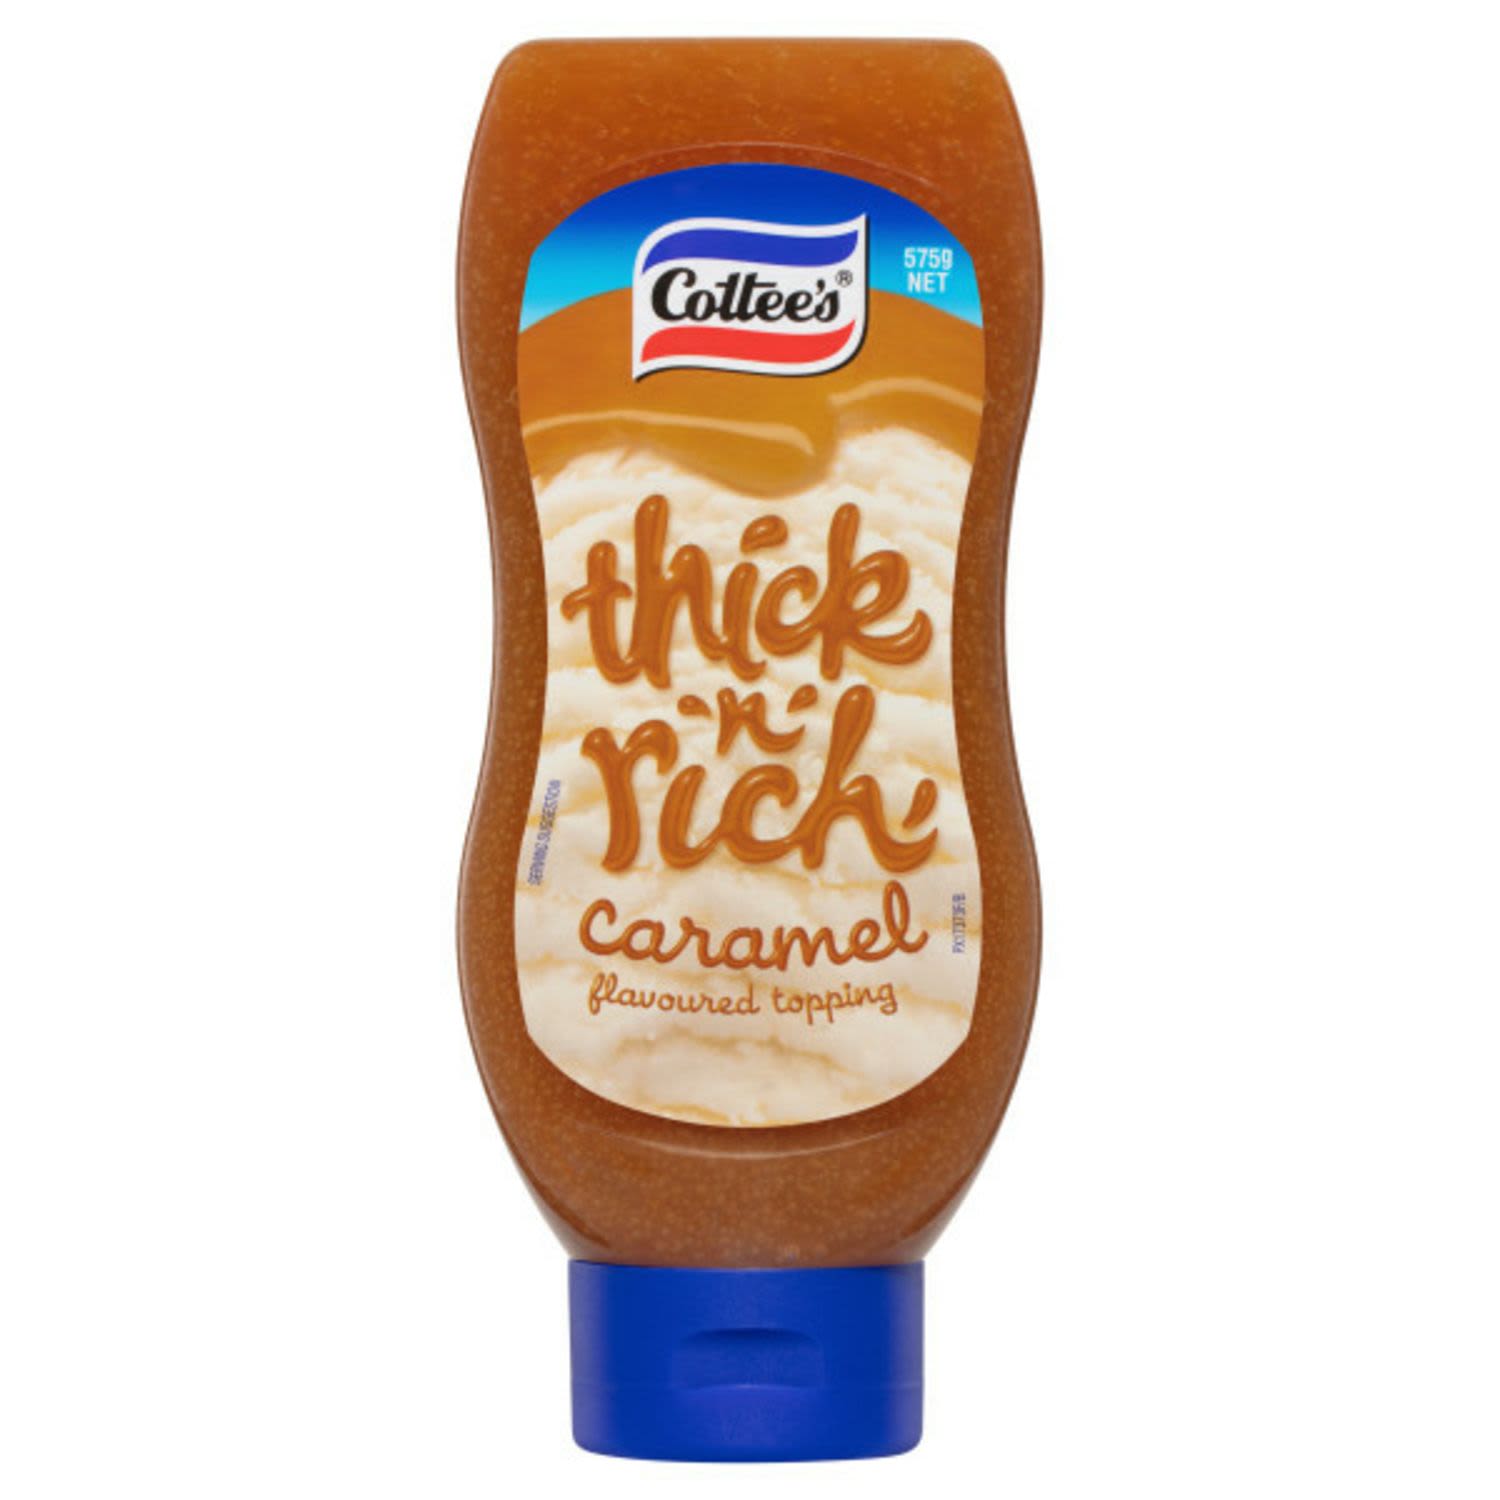 Cottee's Thick 'n' Rich Caramel Flavoured Topping, 575 Gram